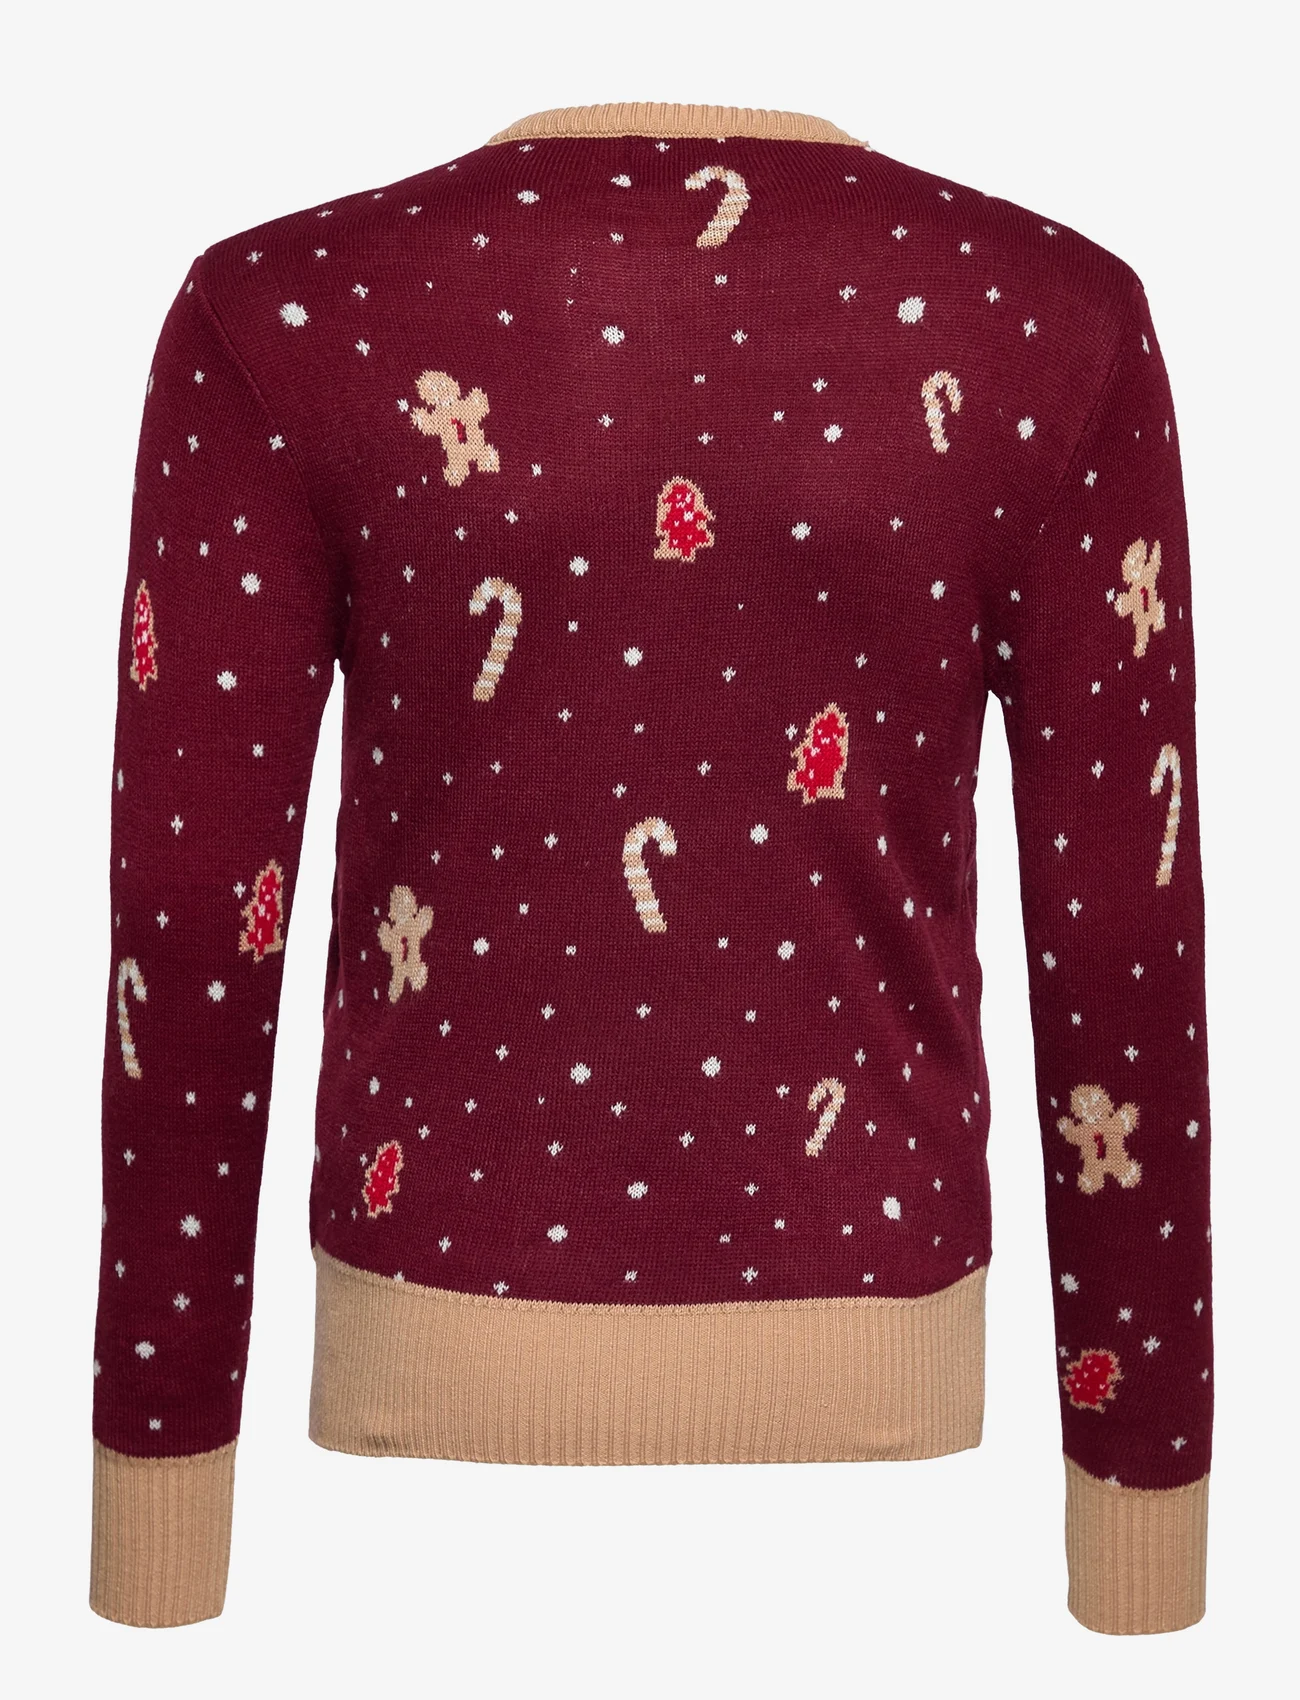 Christmas Sweats - Cute cookie woman - jumpers - red - 1